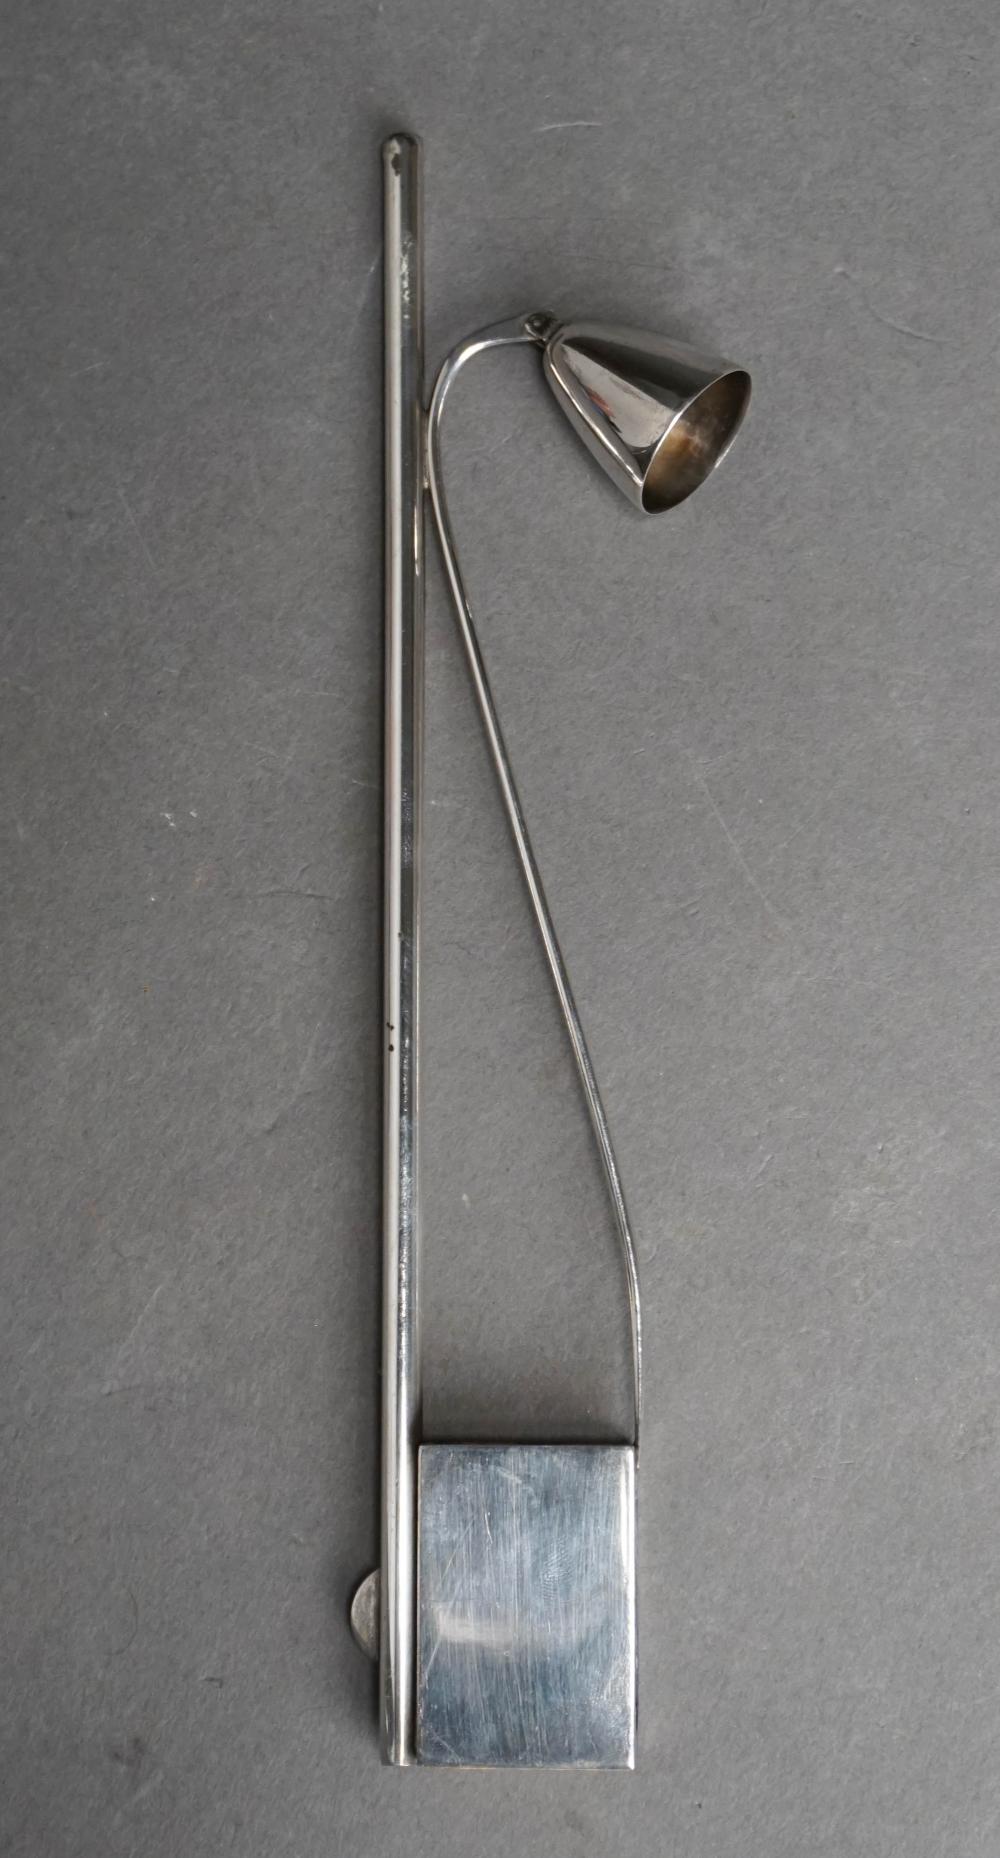 STERLING SILVER CANDLESTICK, SNUFFER